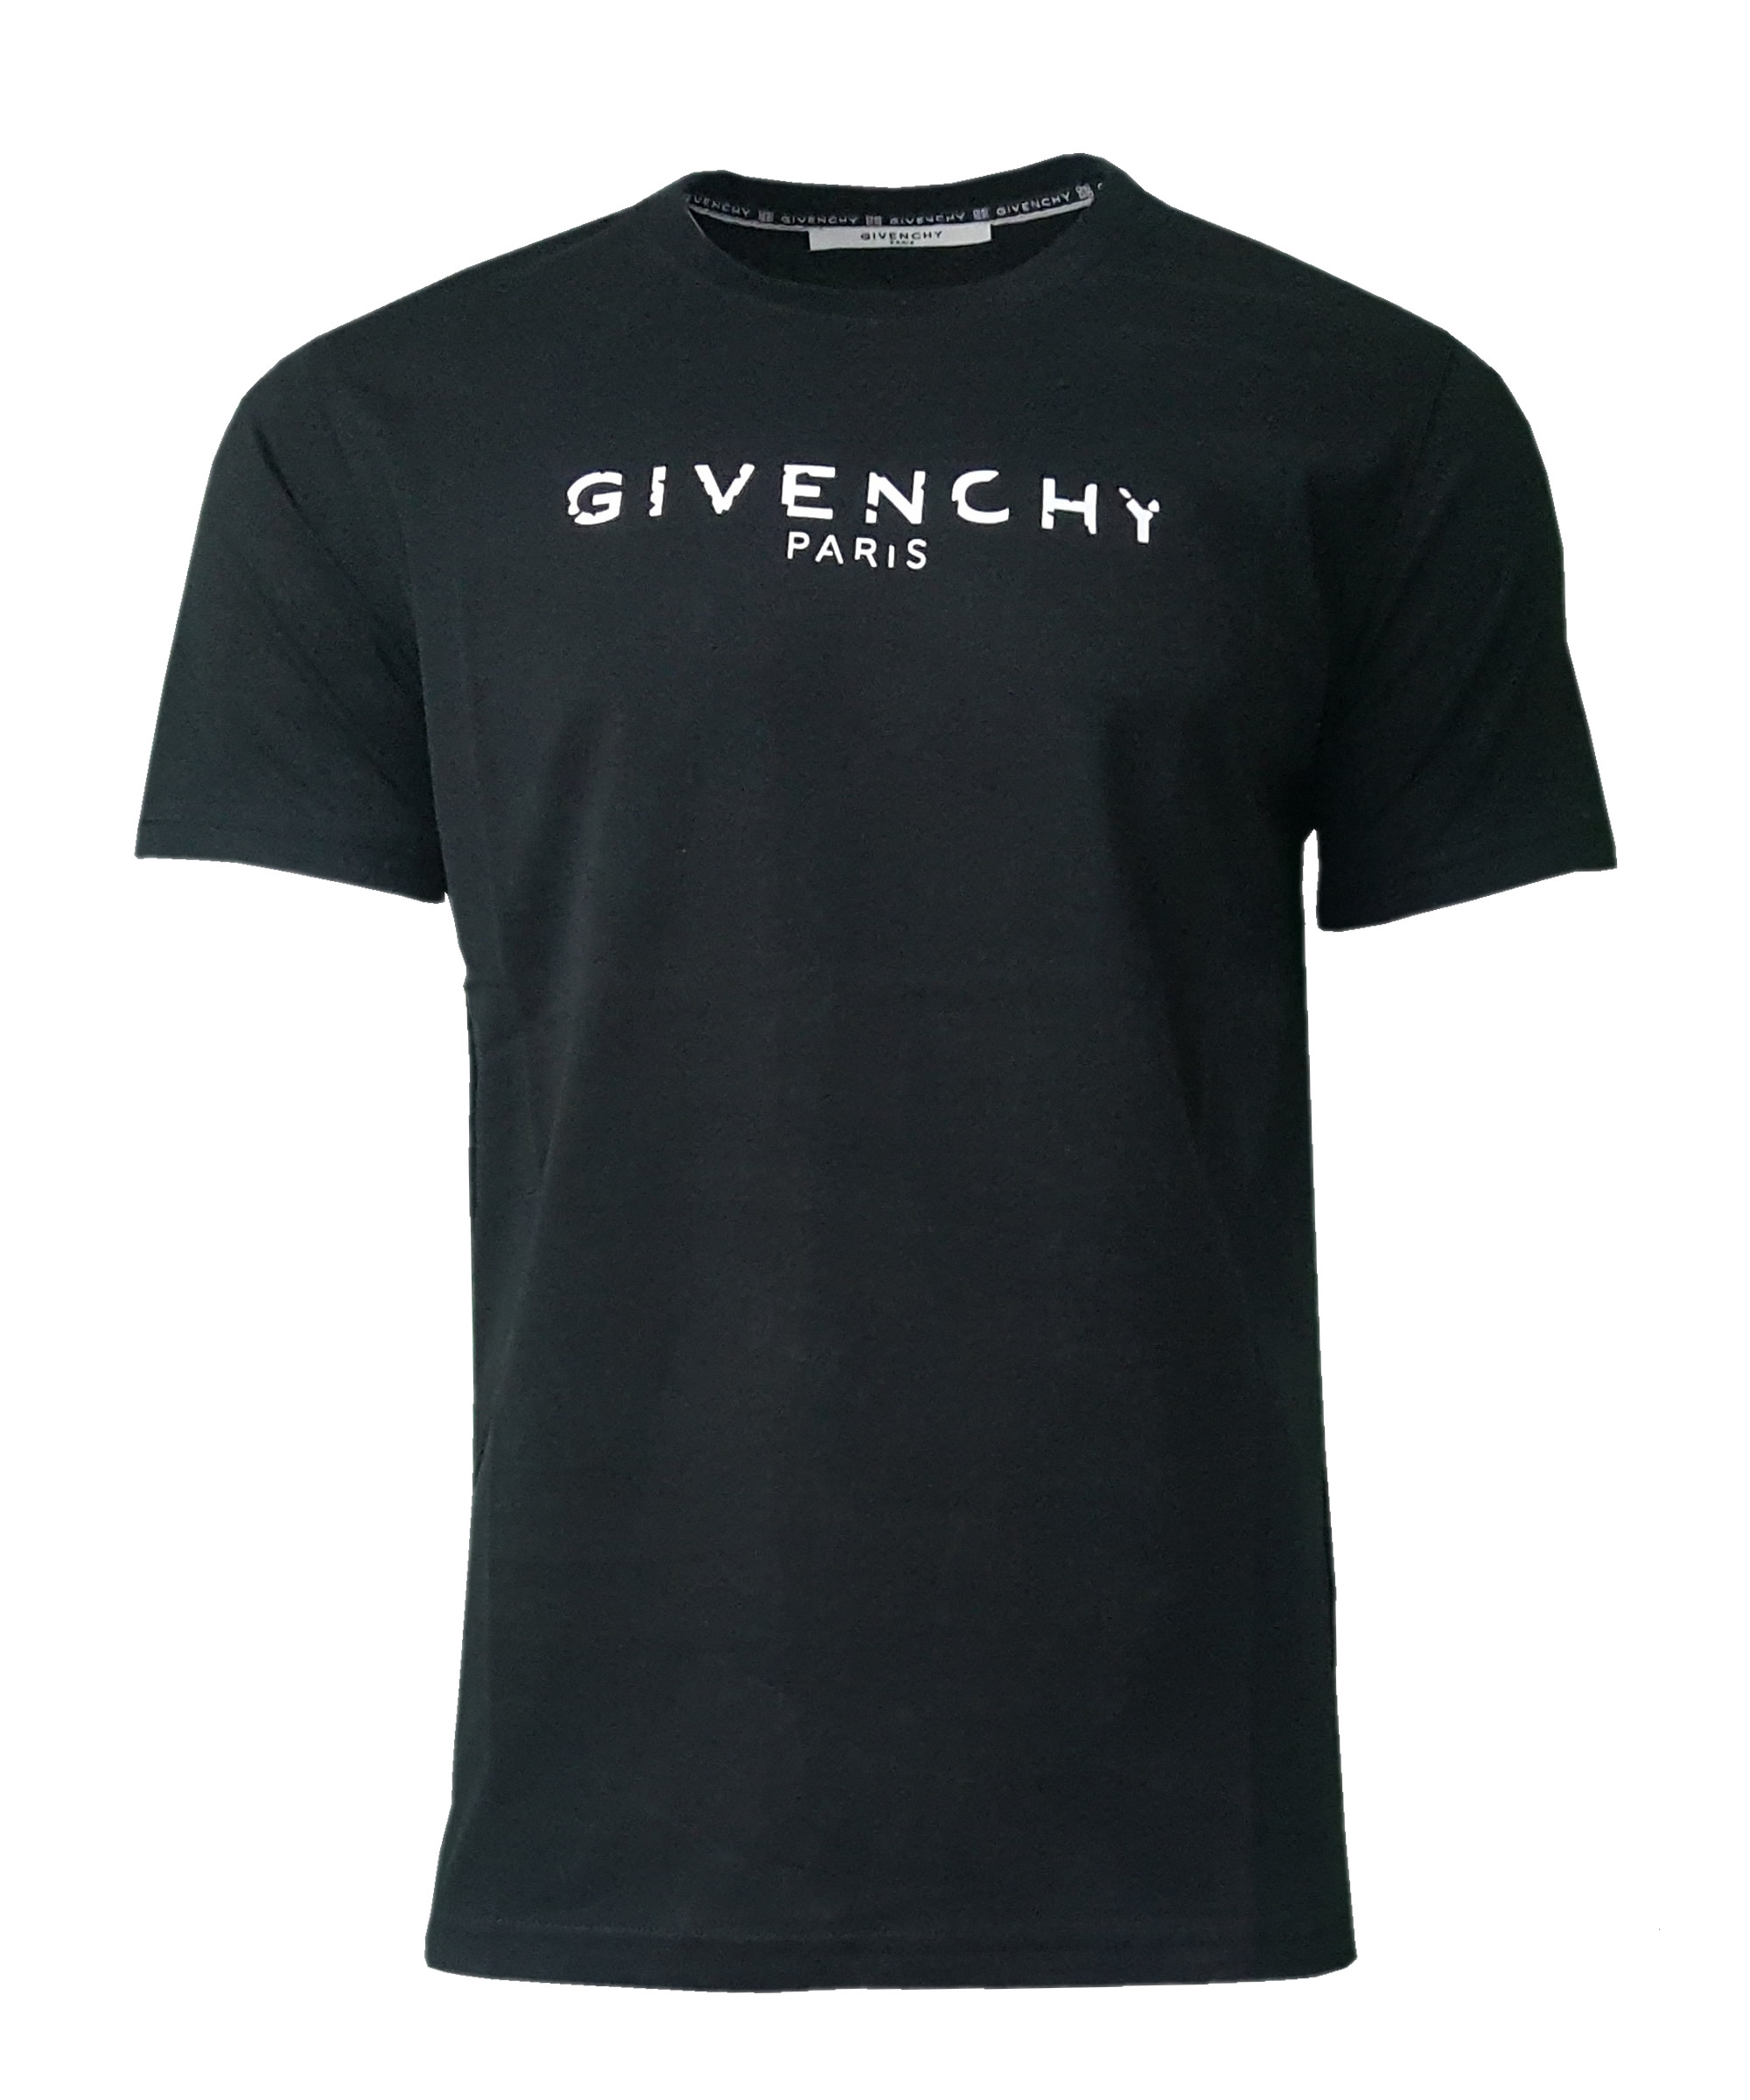 Givenchy Paris Short Sleeve Crew T Shirt. Distressed Print in Black ...